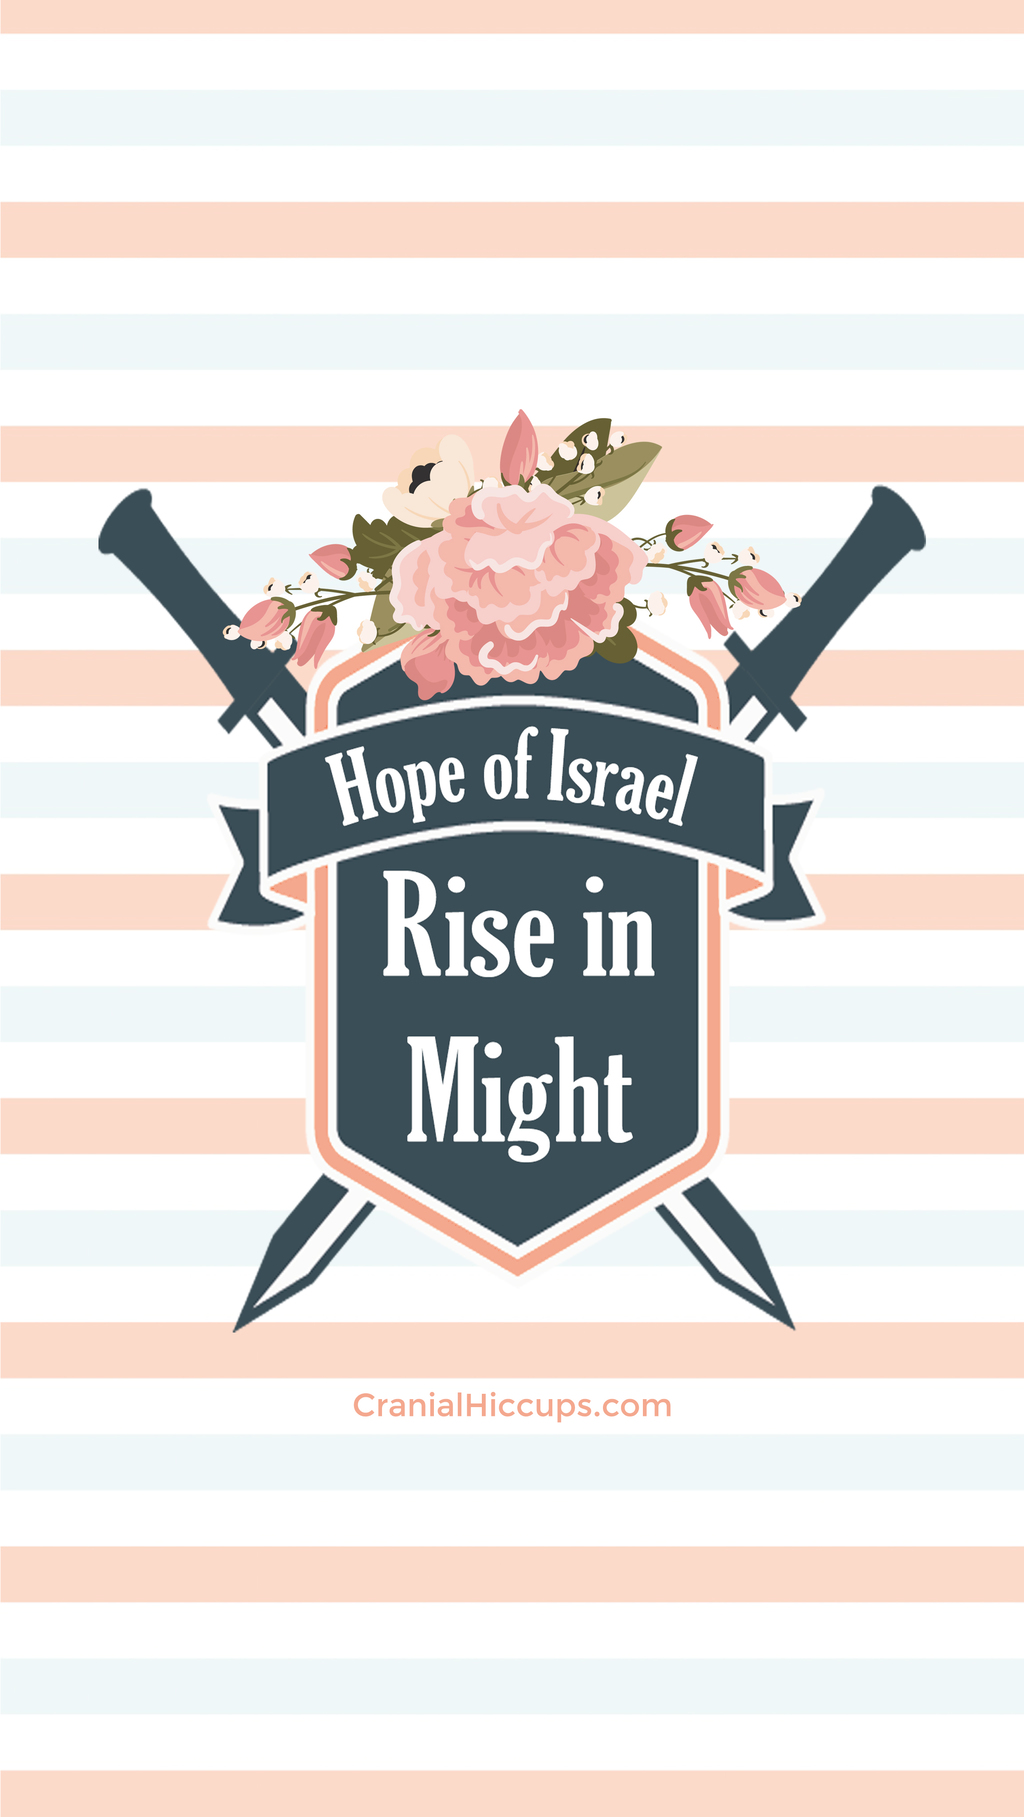 Hope of Israel - Phone Wallpapers - Cranial Hiccups